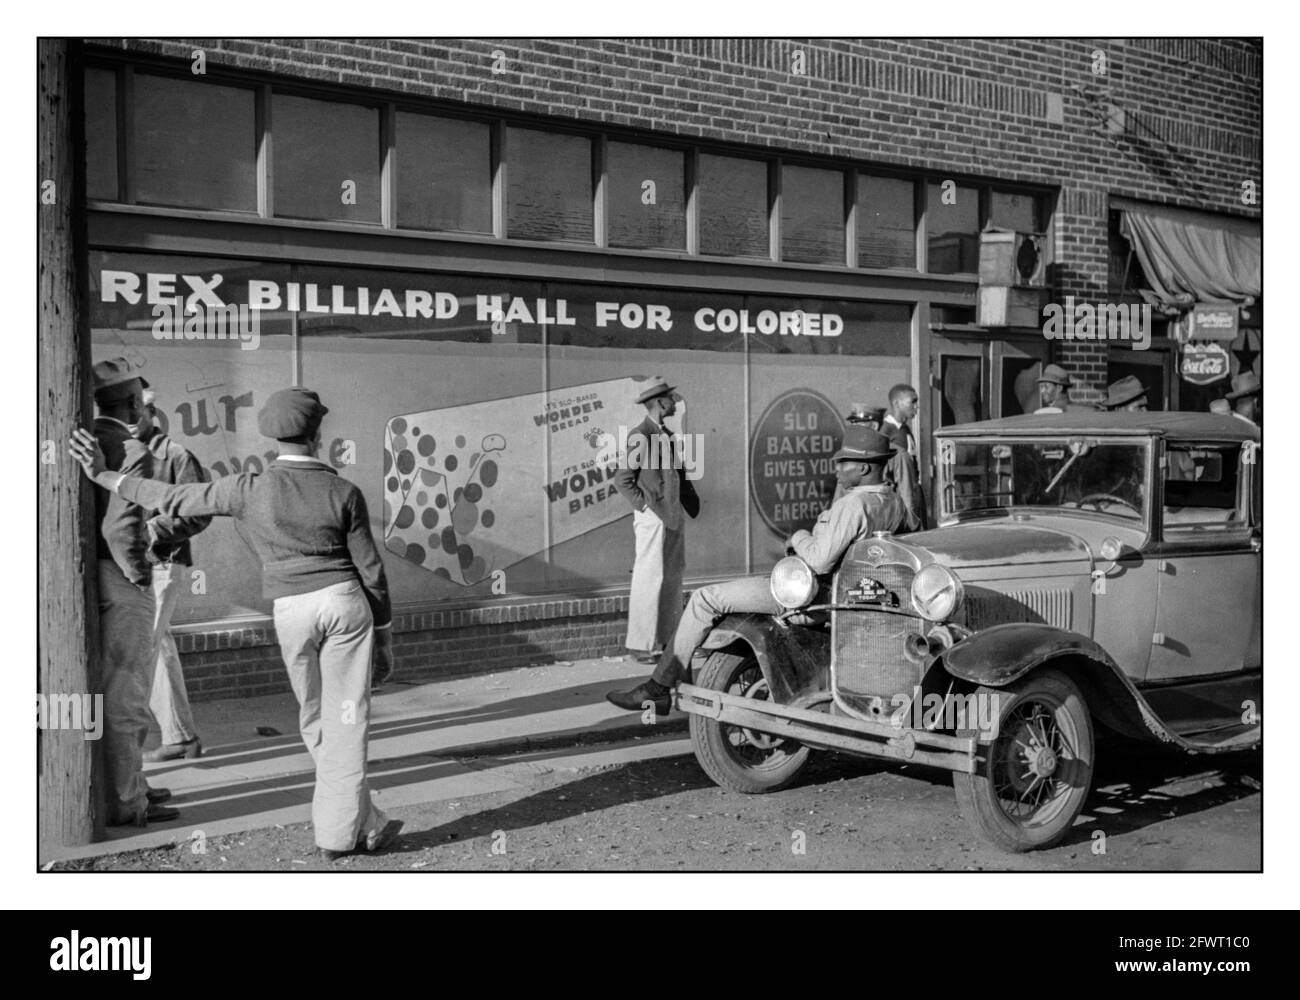 Racial Segregation USA BEALE STREET 1939 ‘Rex Billiard Hall For Colored Only’ Bar Juke Joint segregation by race racist Civil Rights apartheid separation by colour. Group of African American young men standing outside in front of a billiard hall waiting for it to open. Beale Street in Memphis, Tennessee. Photograph by Marion Post Wolcott, c1939. Stock Photo